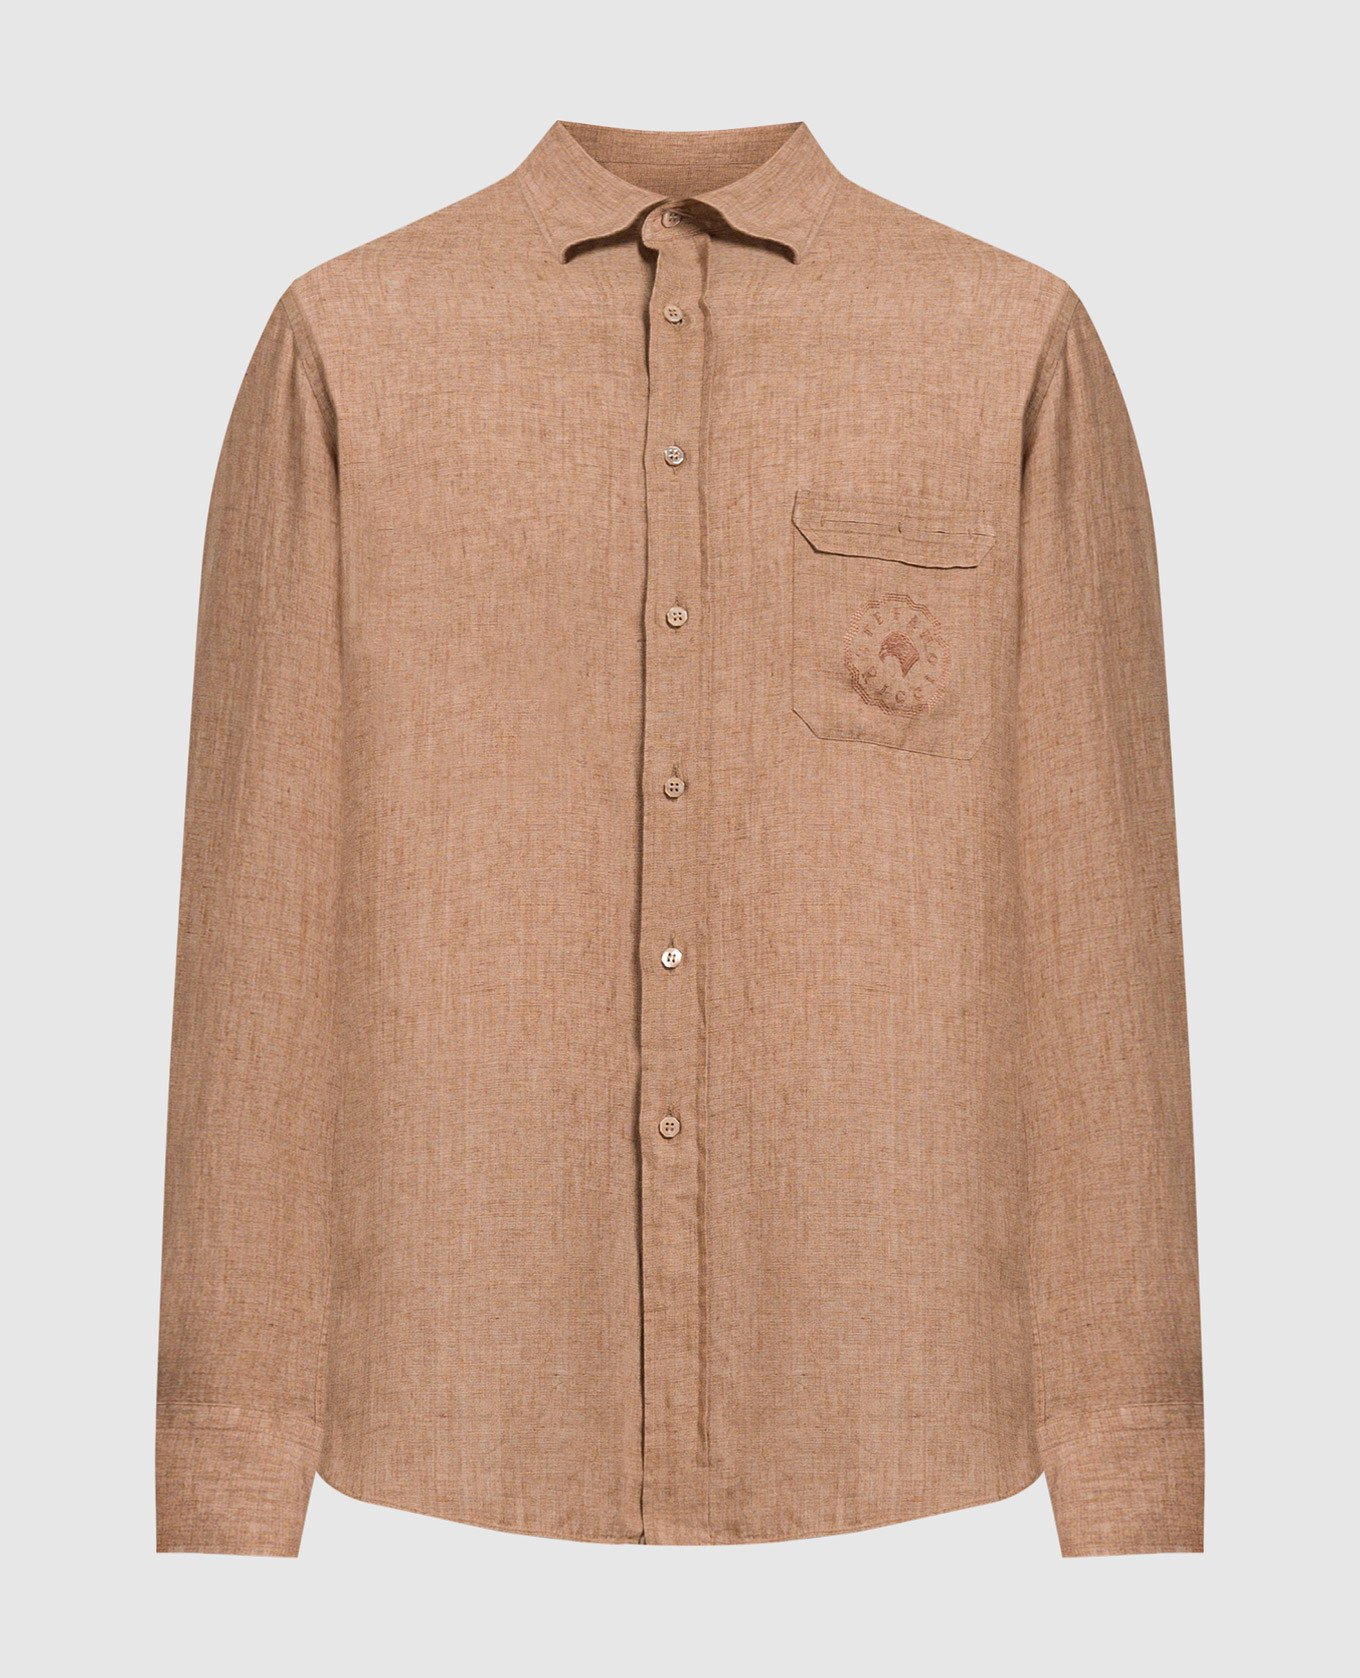 Brown linen shirt with logo embroidery